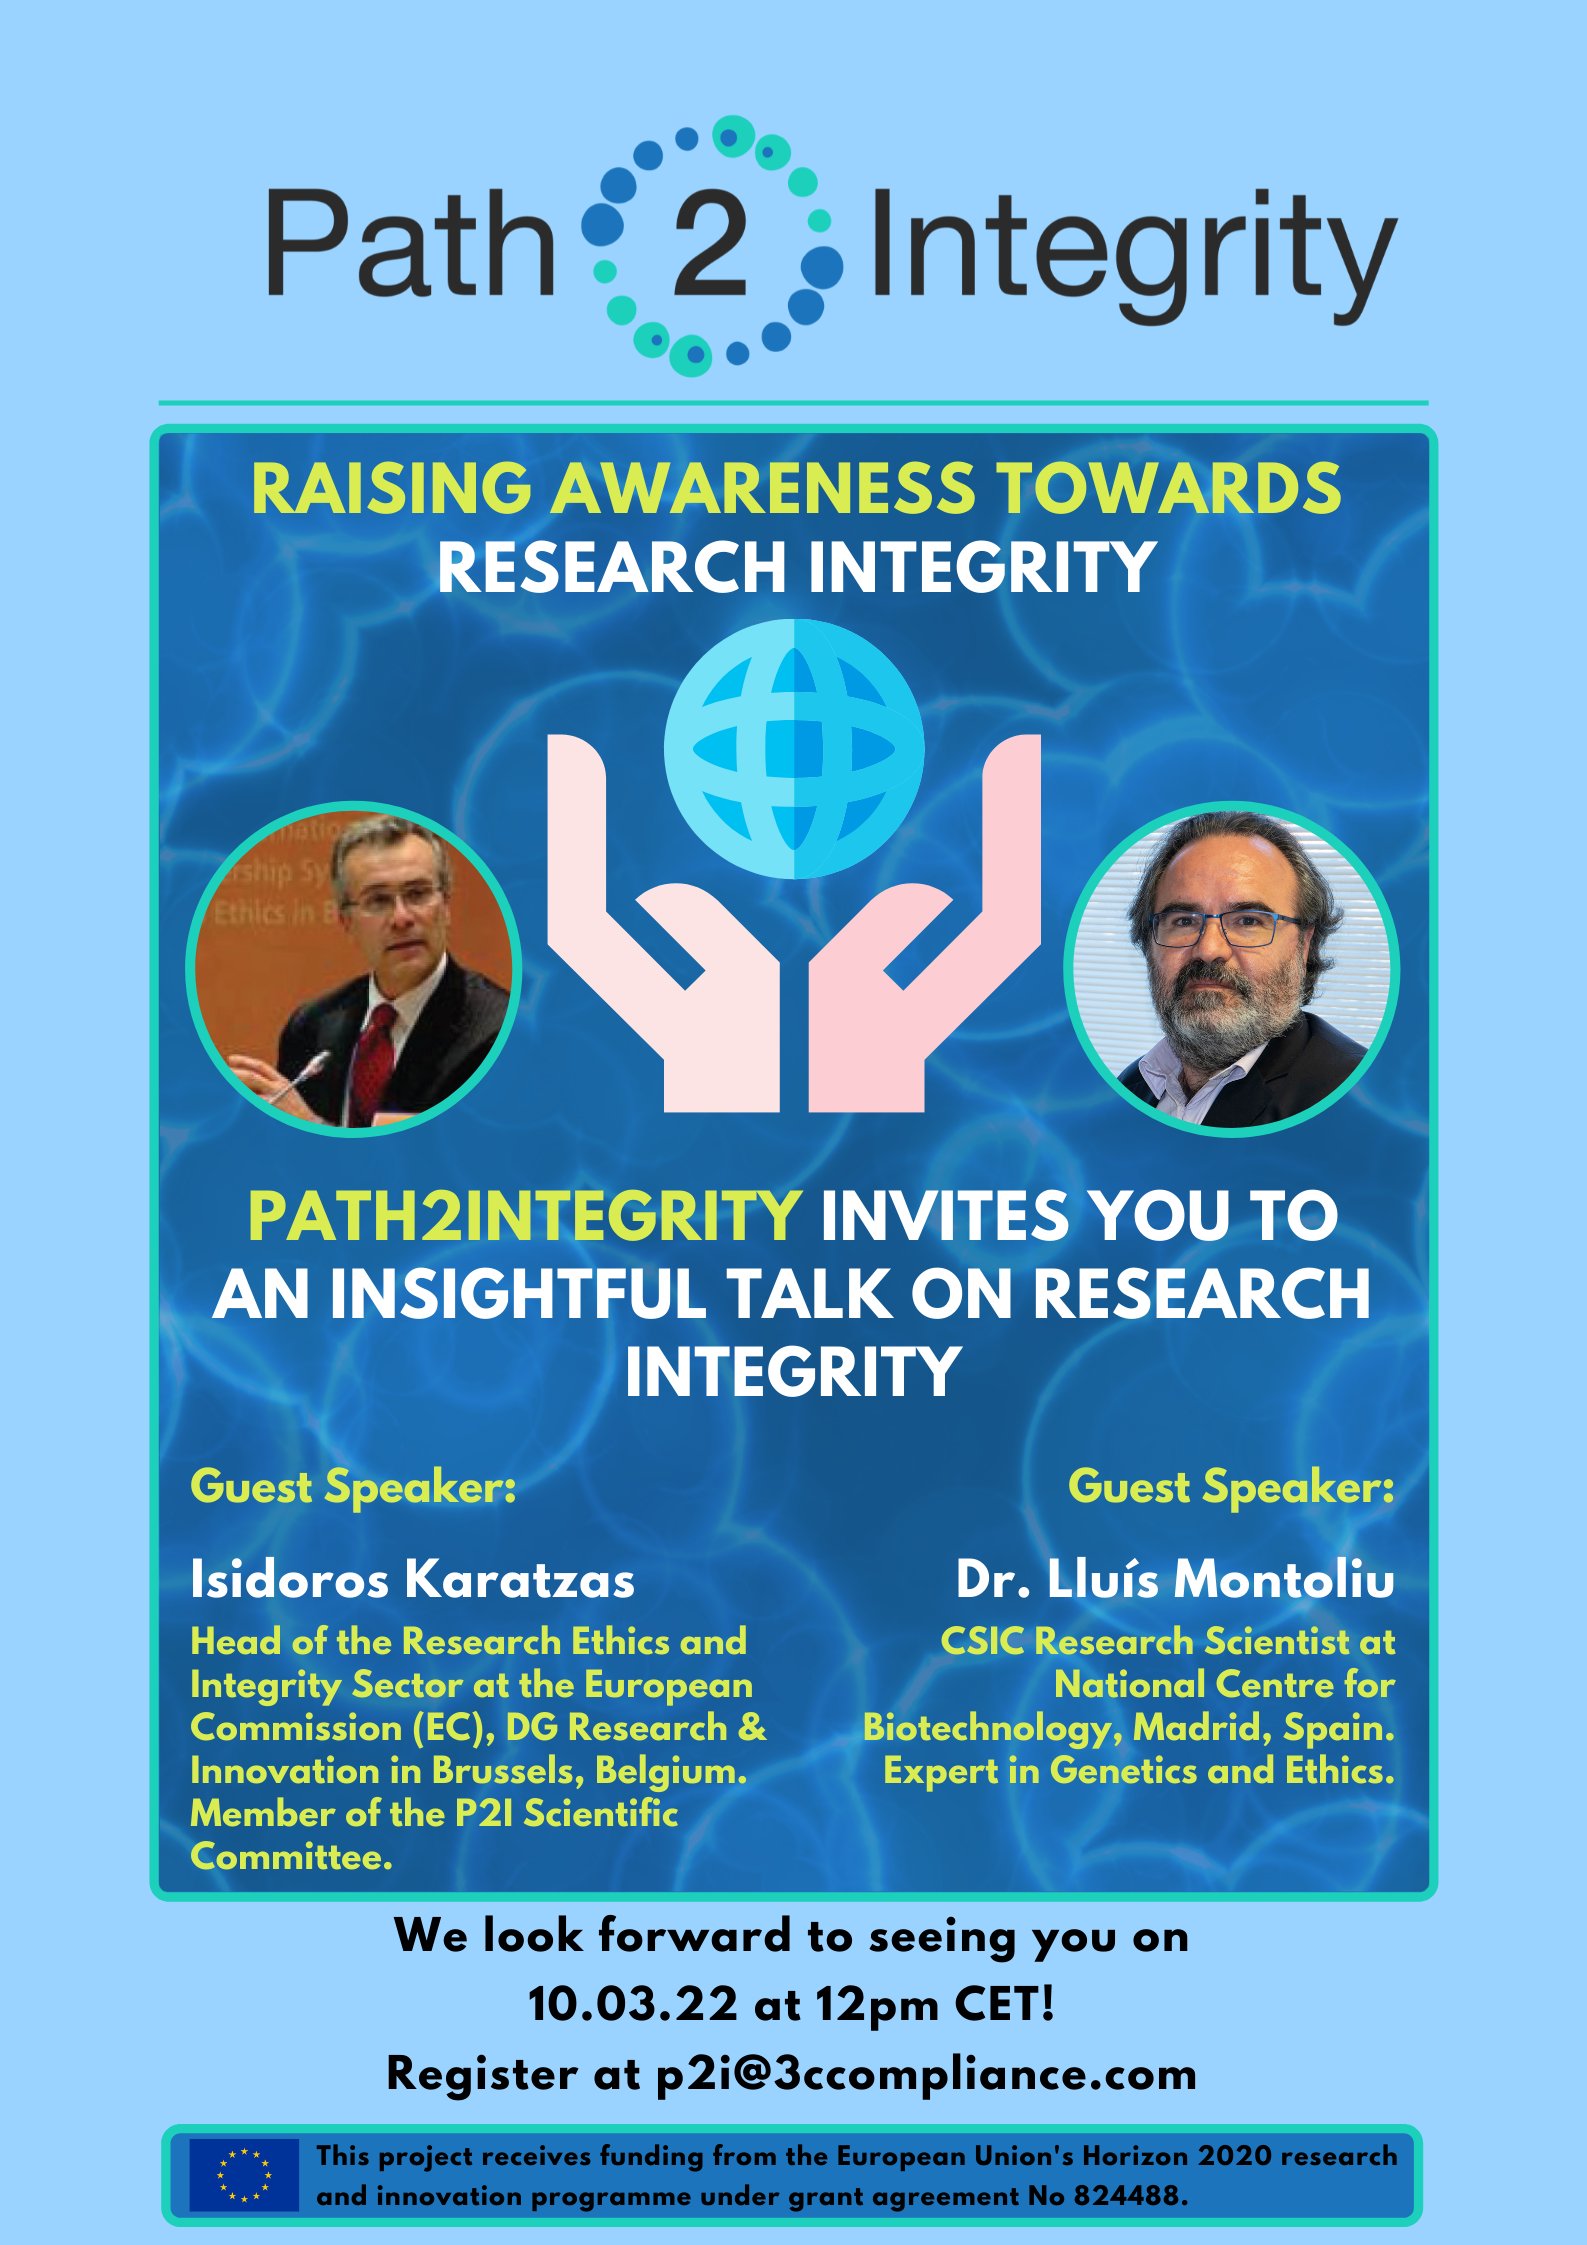 New dialogues on research integrity 10.03.22